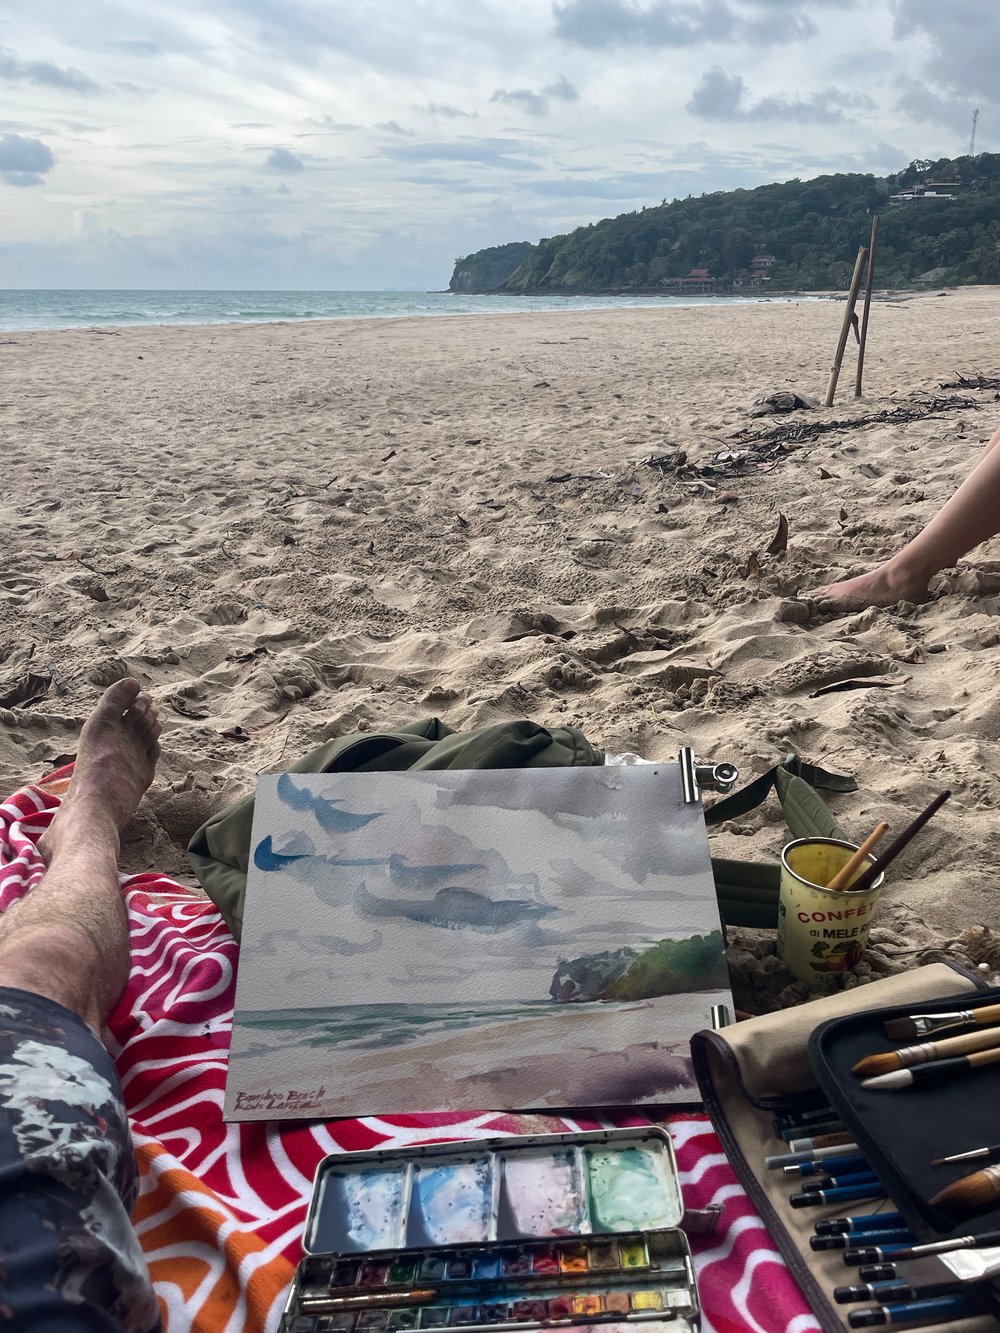 Next day we hit Bamboo Beach and I get in a quick watercolour